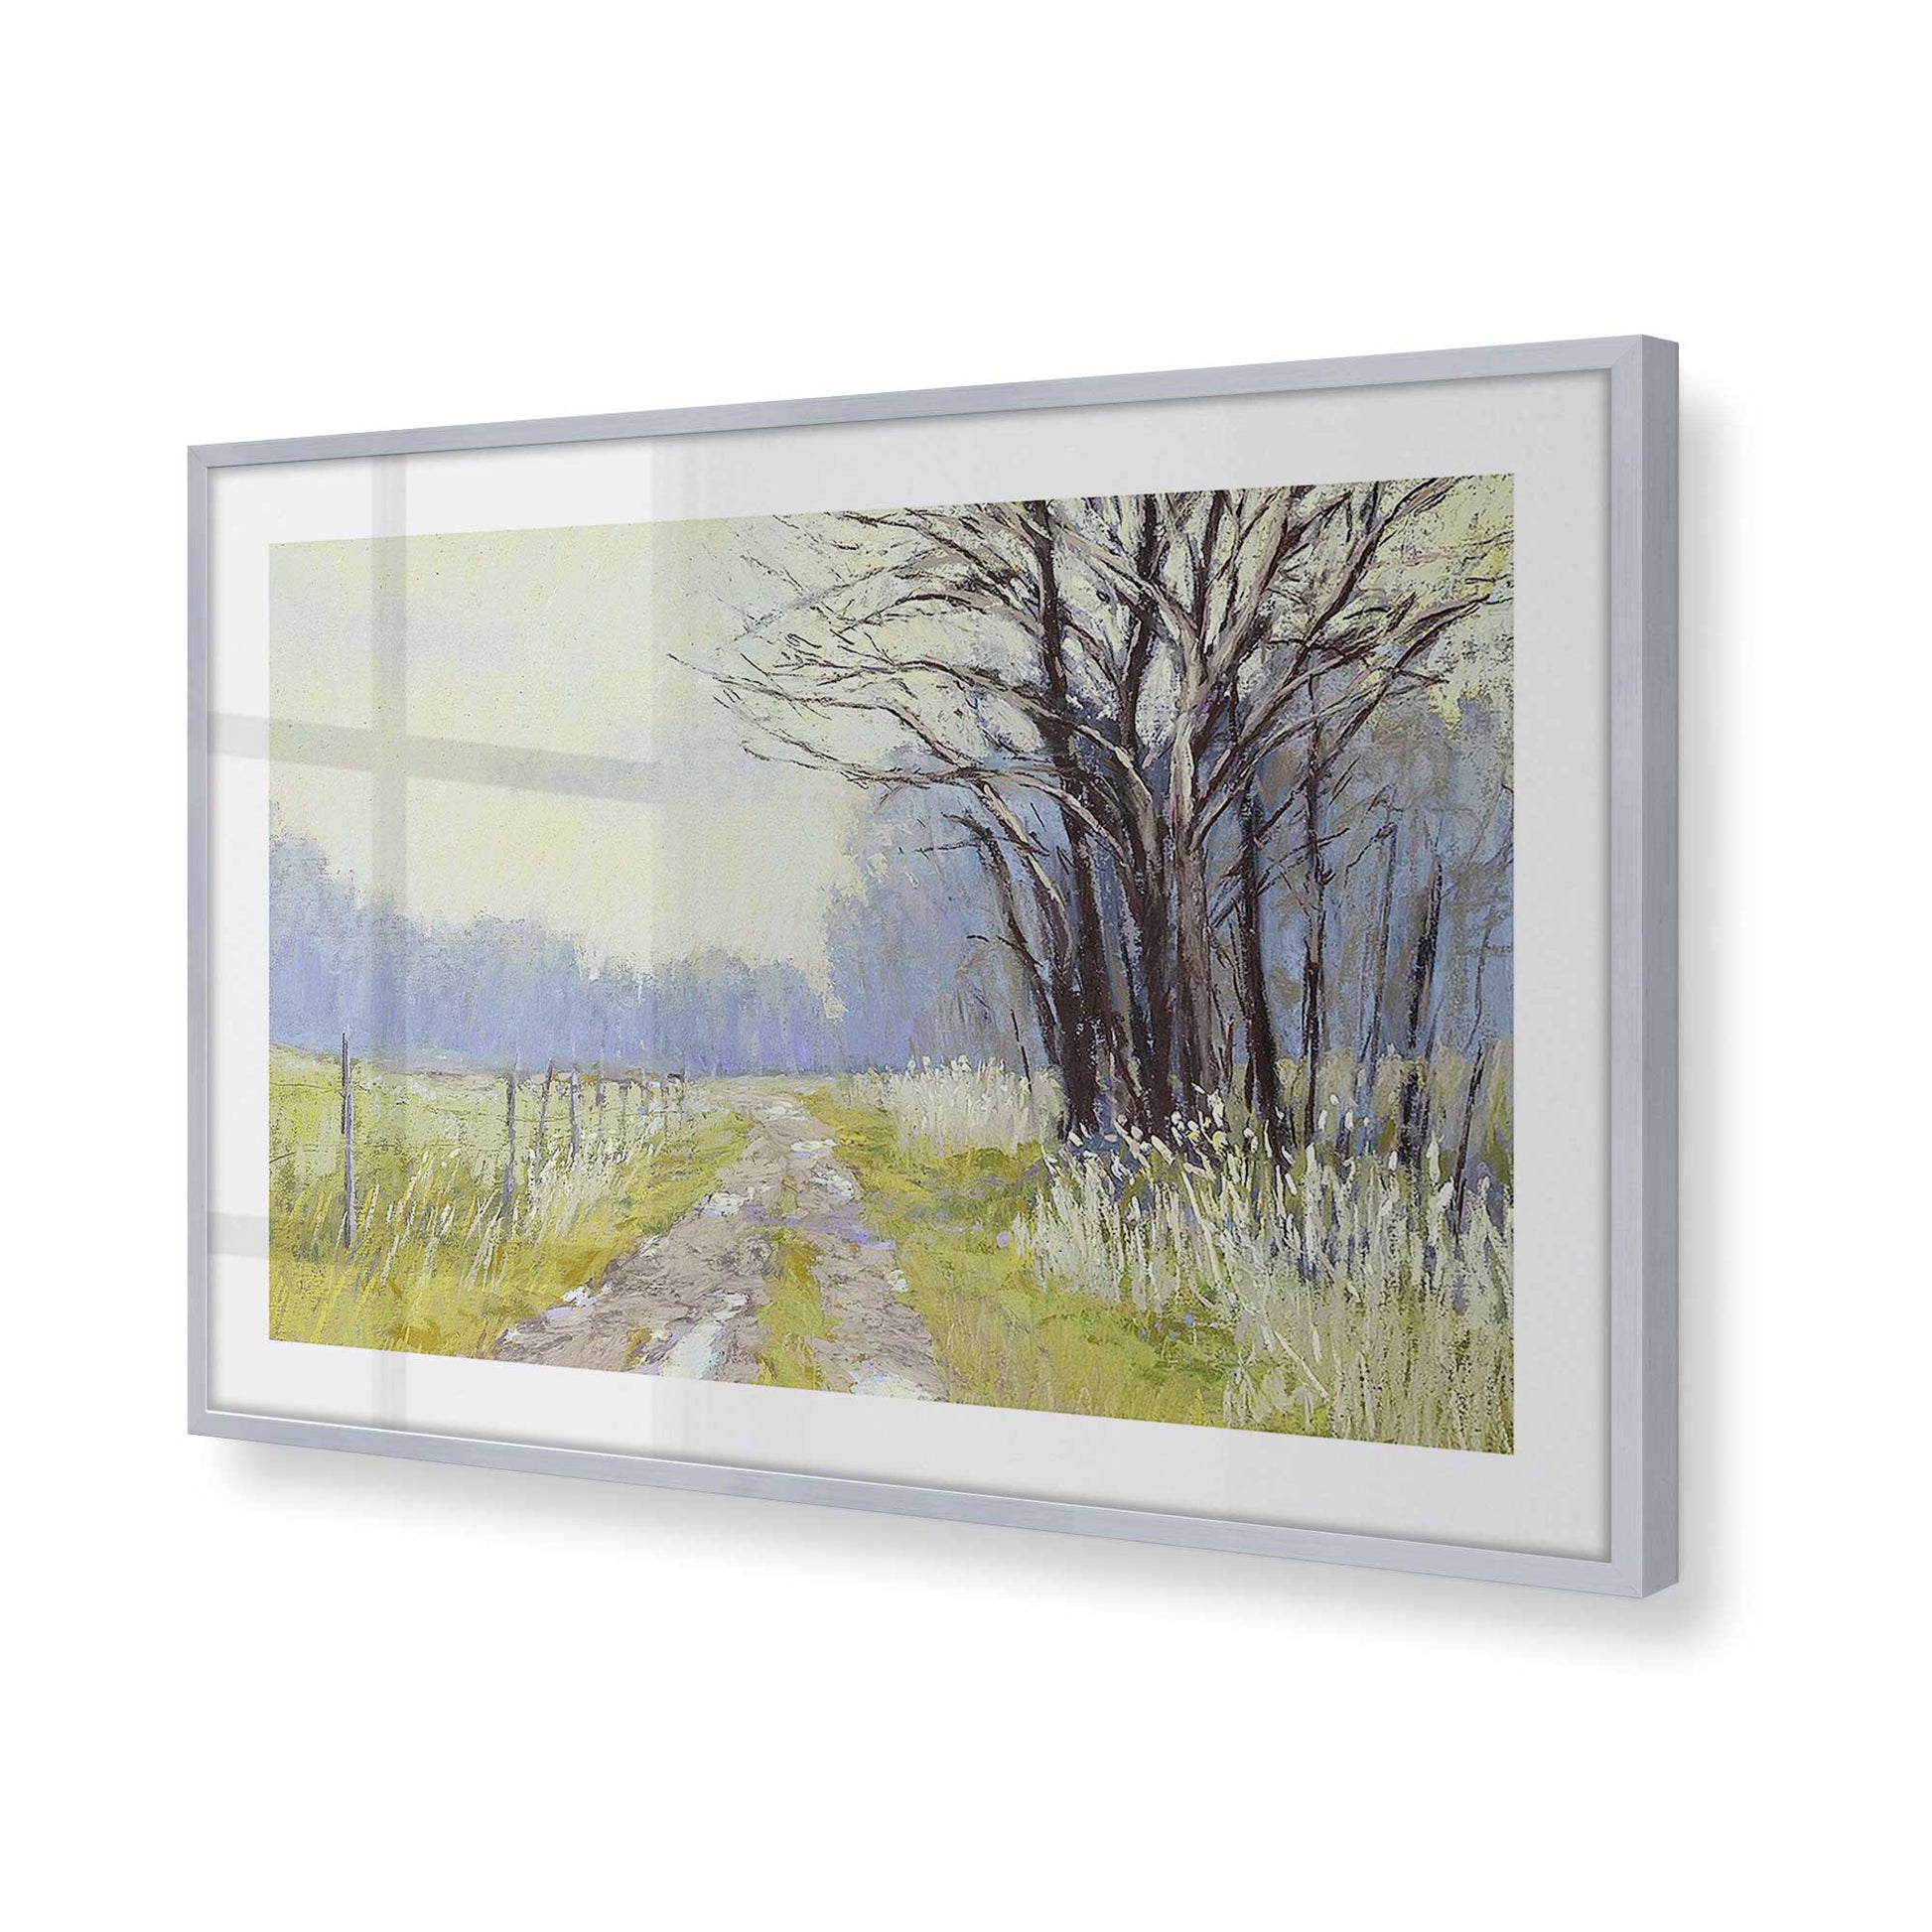 [Color:Polished Chrome], Picture of art in a Polished Chrome frame at an angle